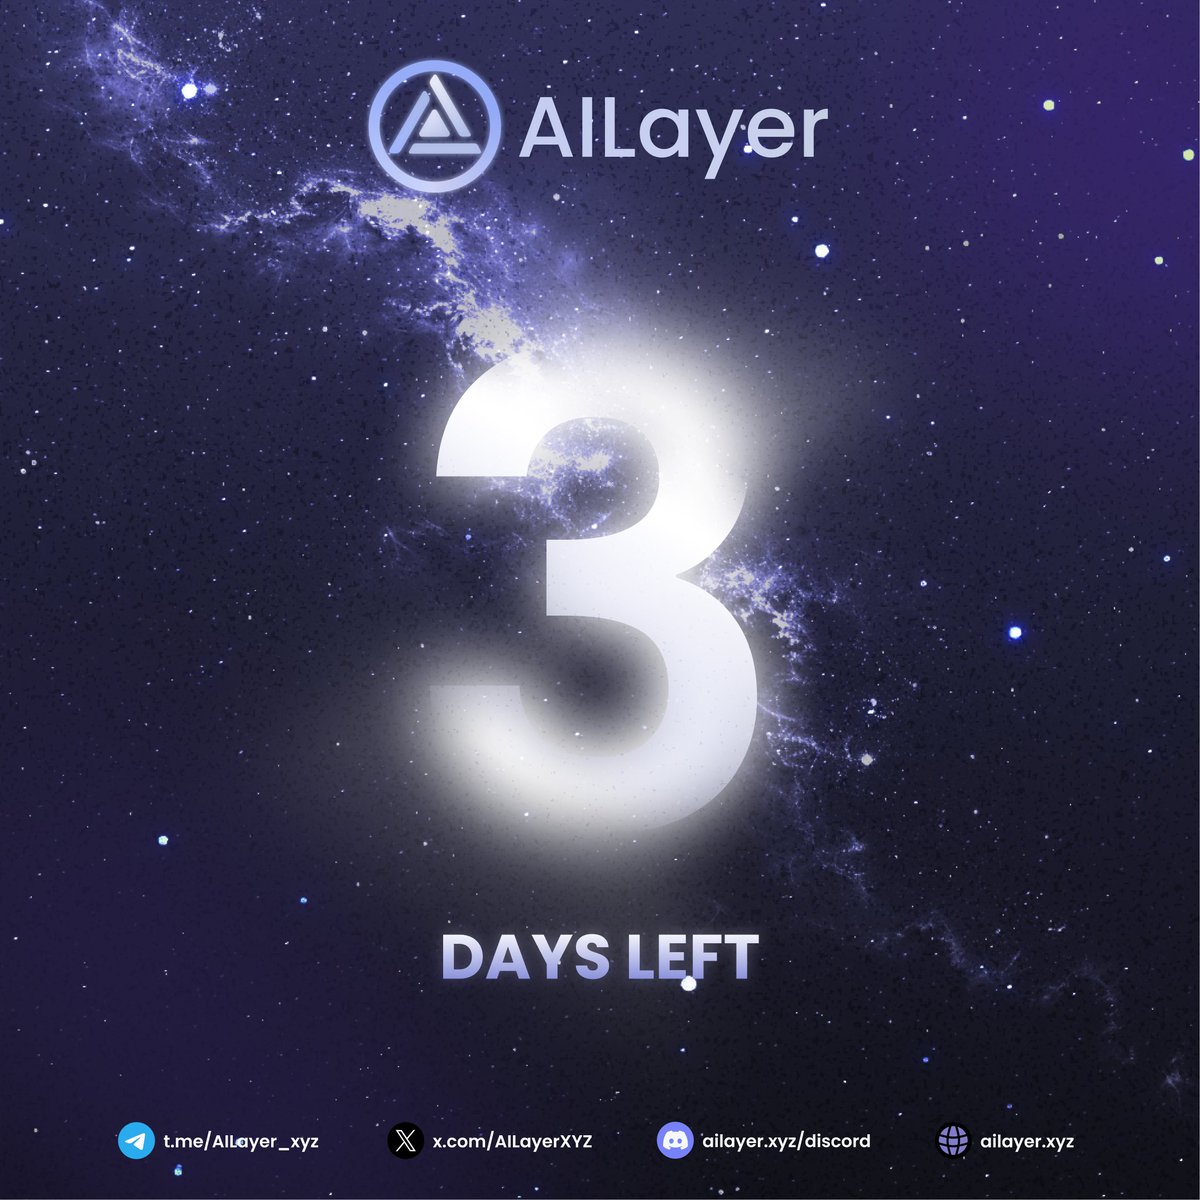 ⏳ Countdown Initiated! #AILayer Social Campaign Epoch 2 will launch in 3 days! 🚀

Get ready to ⤵️
Post. Comment. Sign in. Earn.

#AI #Bitcoin #Layer2